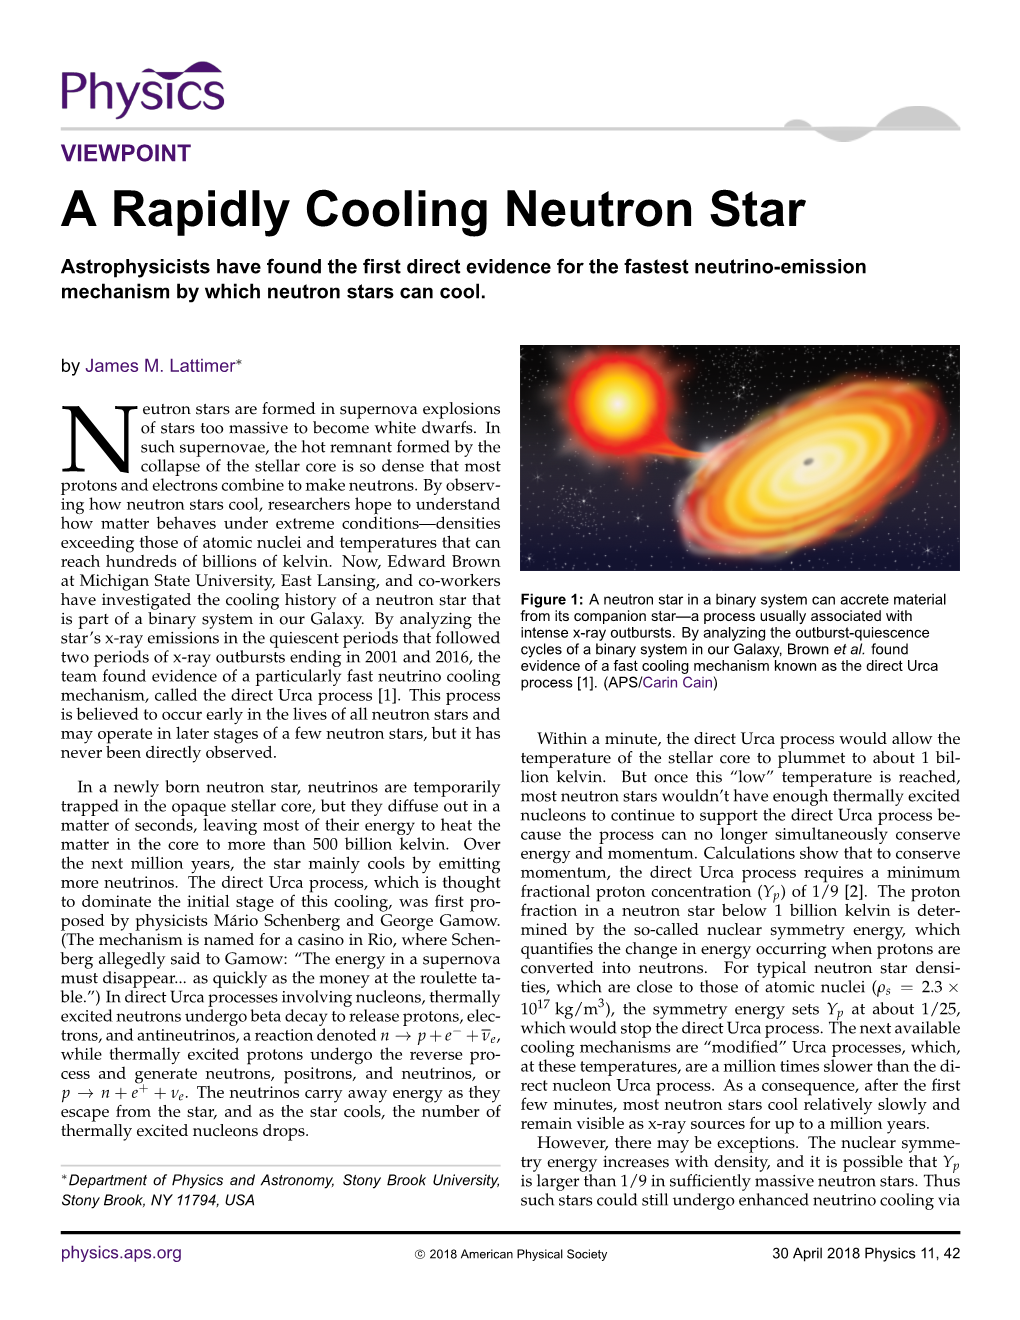 A Rapidly Cooling Neutron Star